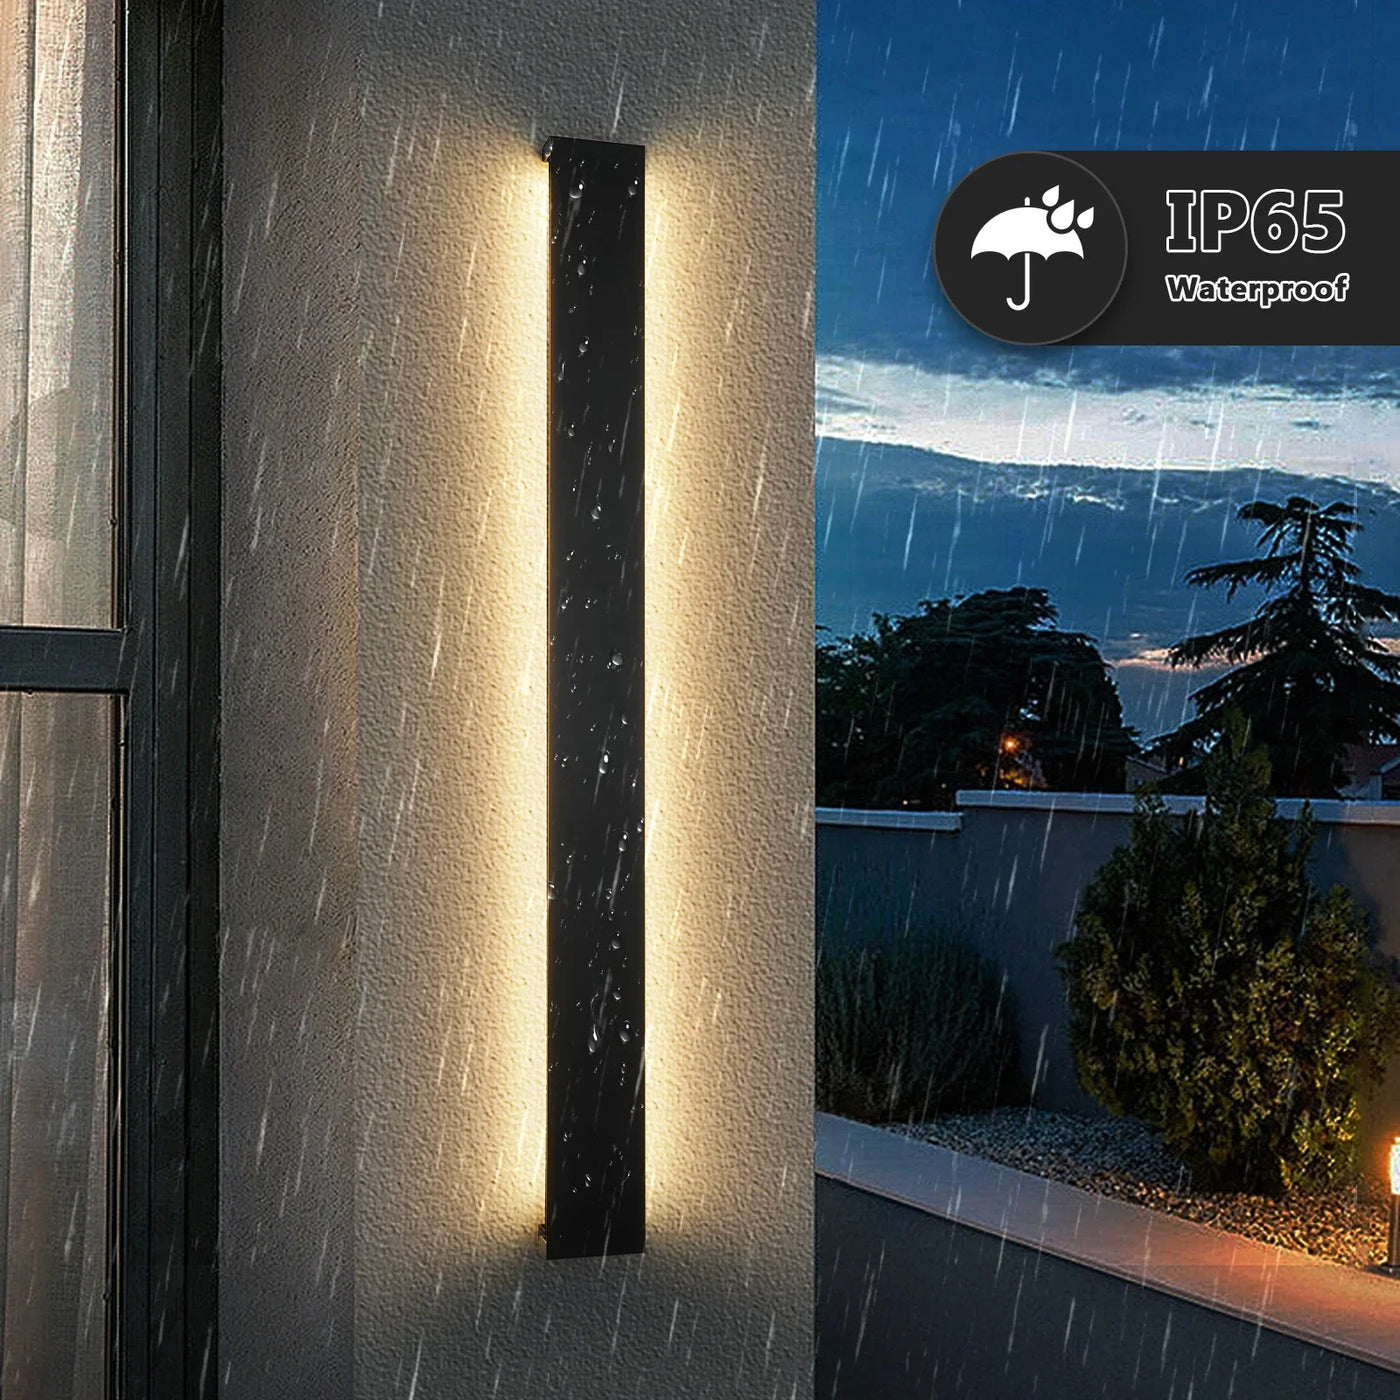 Modern Waterproof LED Wall Light - Outdoor Lighting for Home Garden and Outdoor Decor